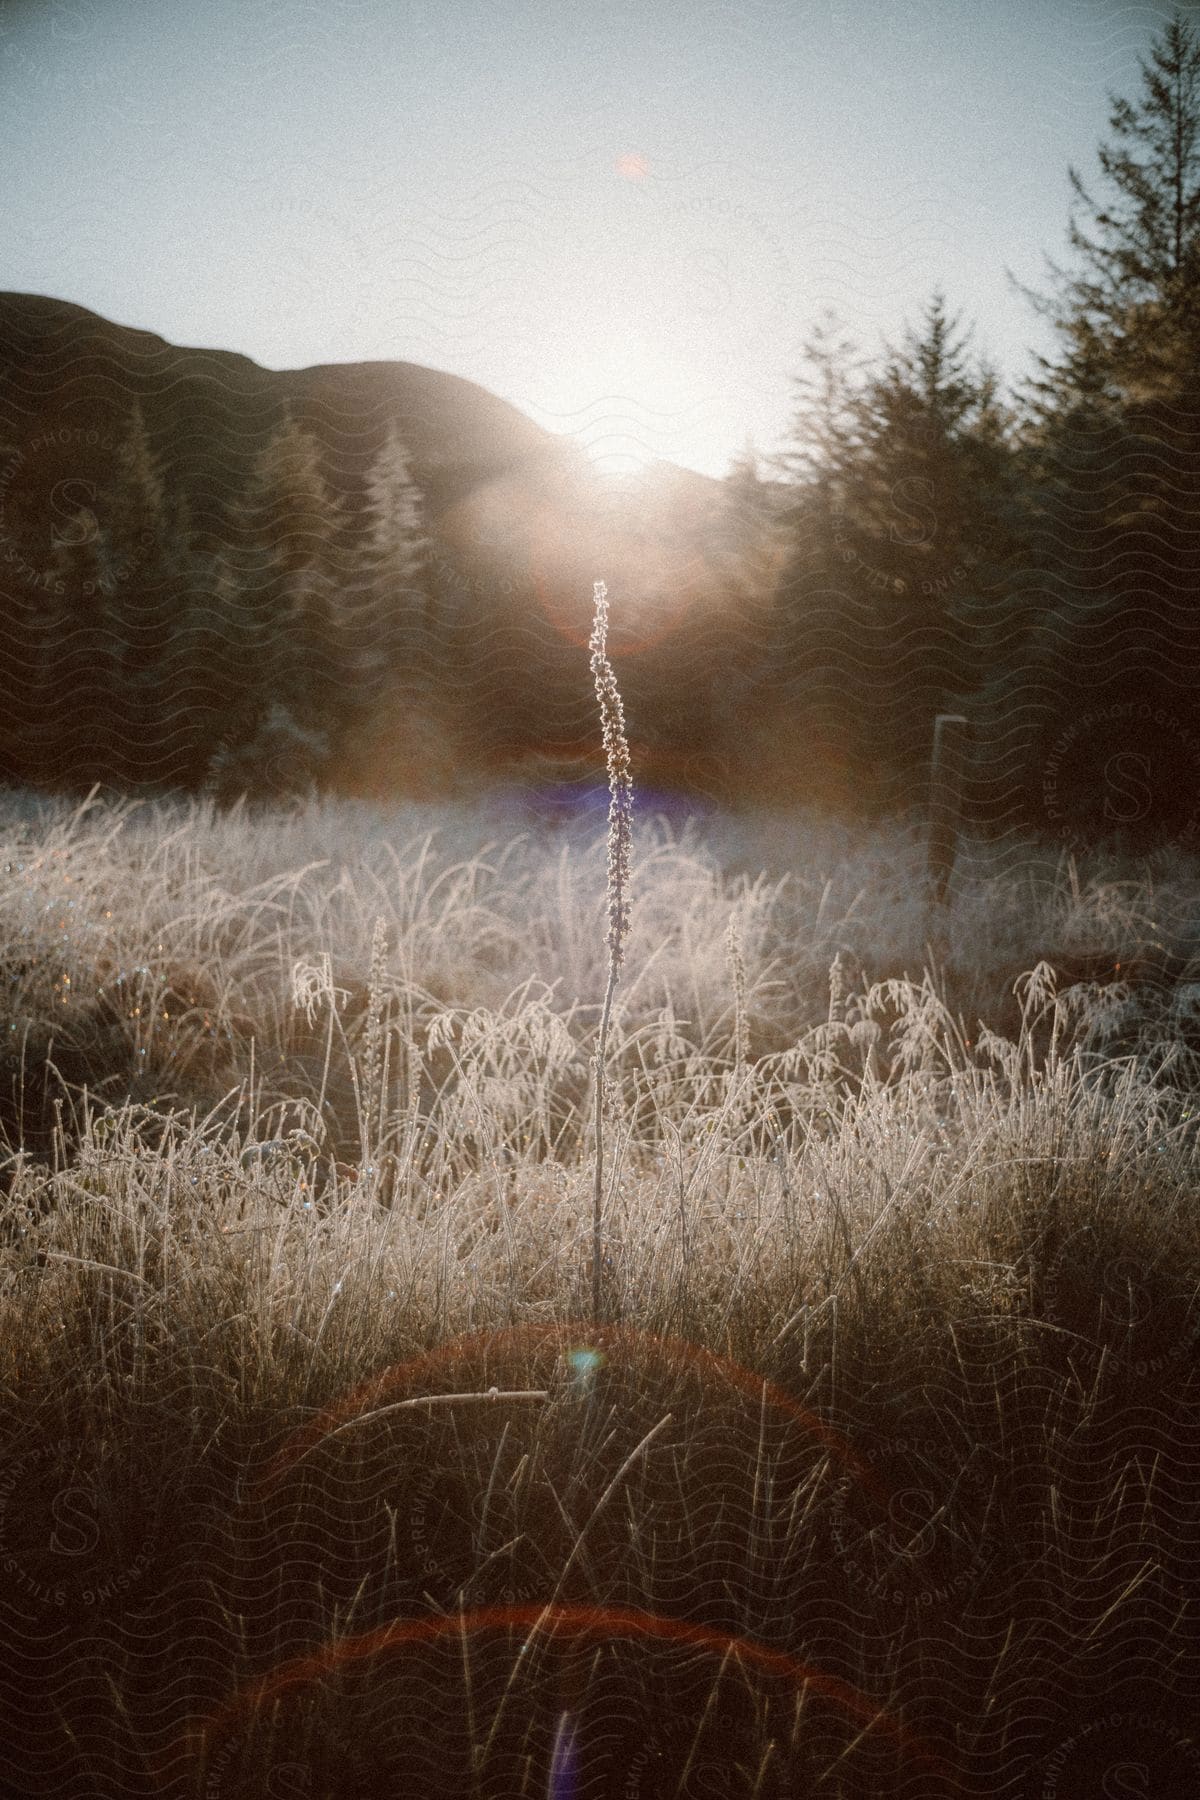 The sun rises over a grassy field surrounded by an evergreen forest.